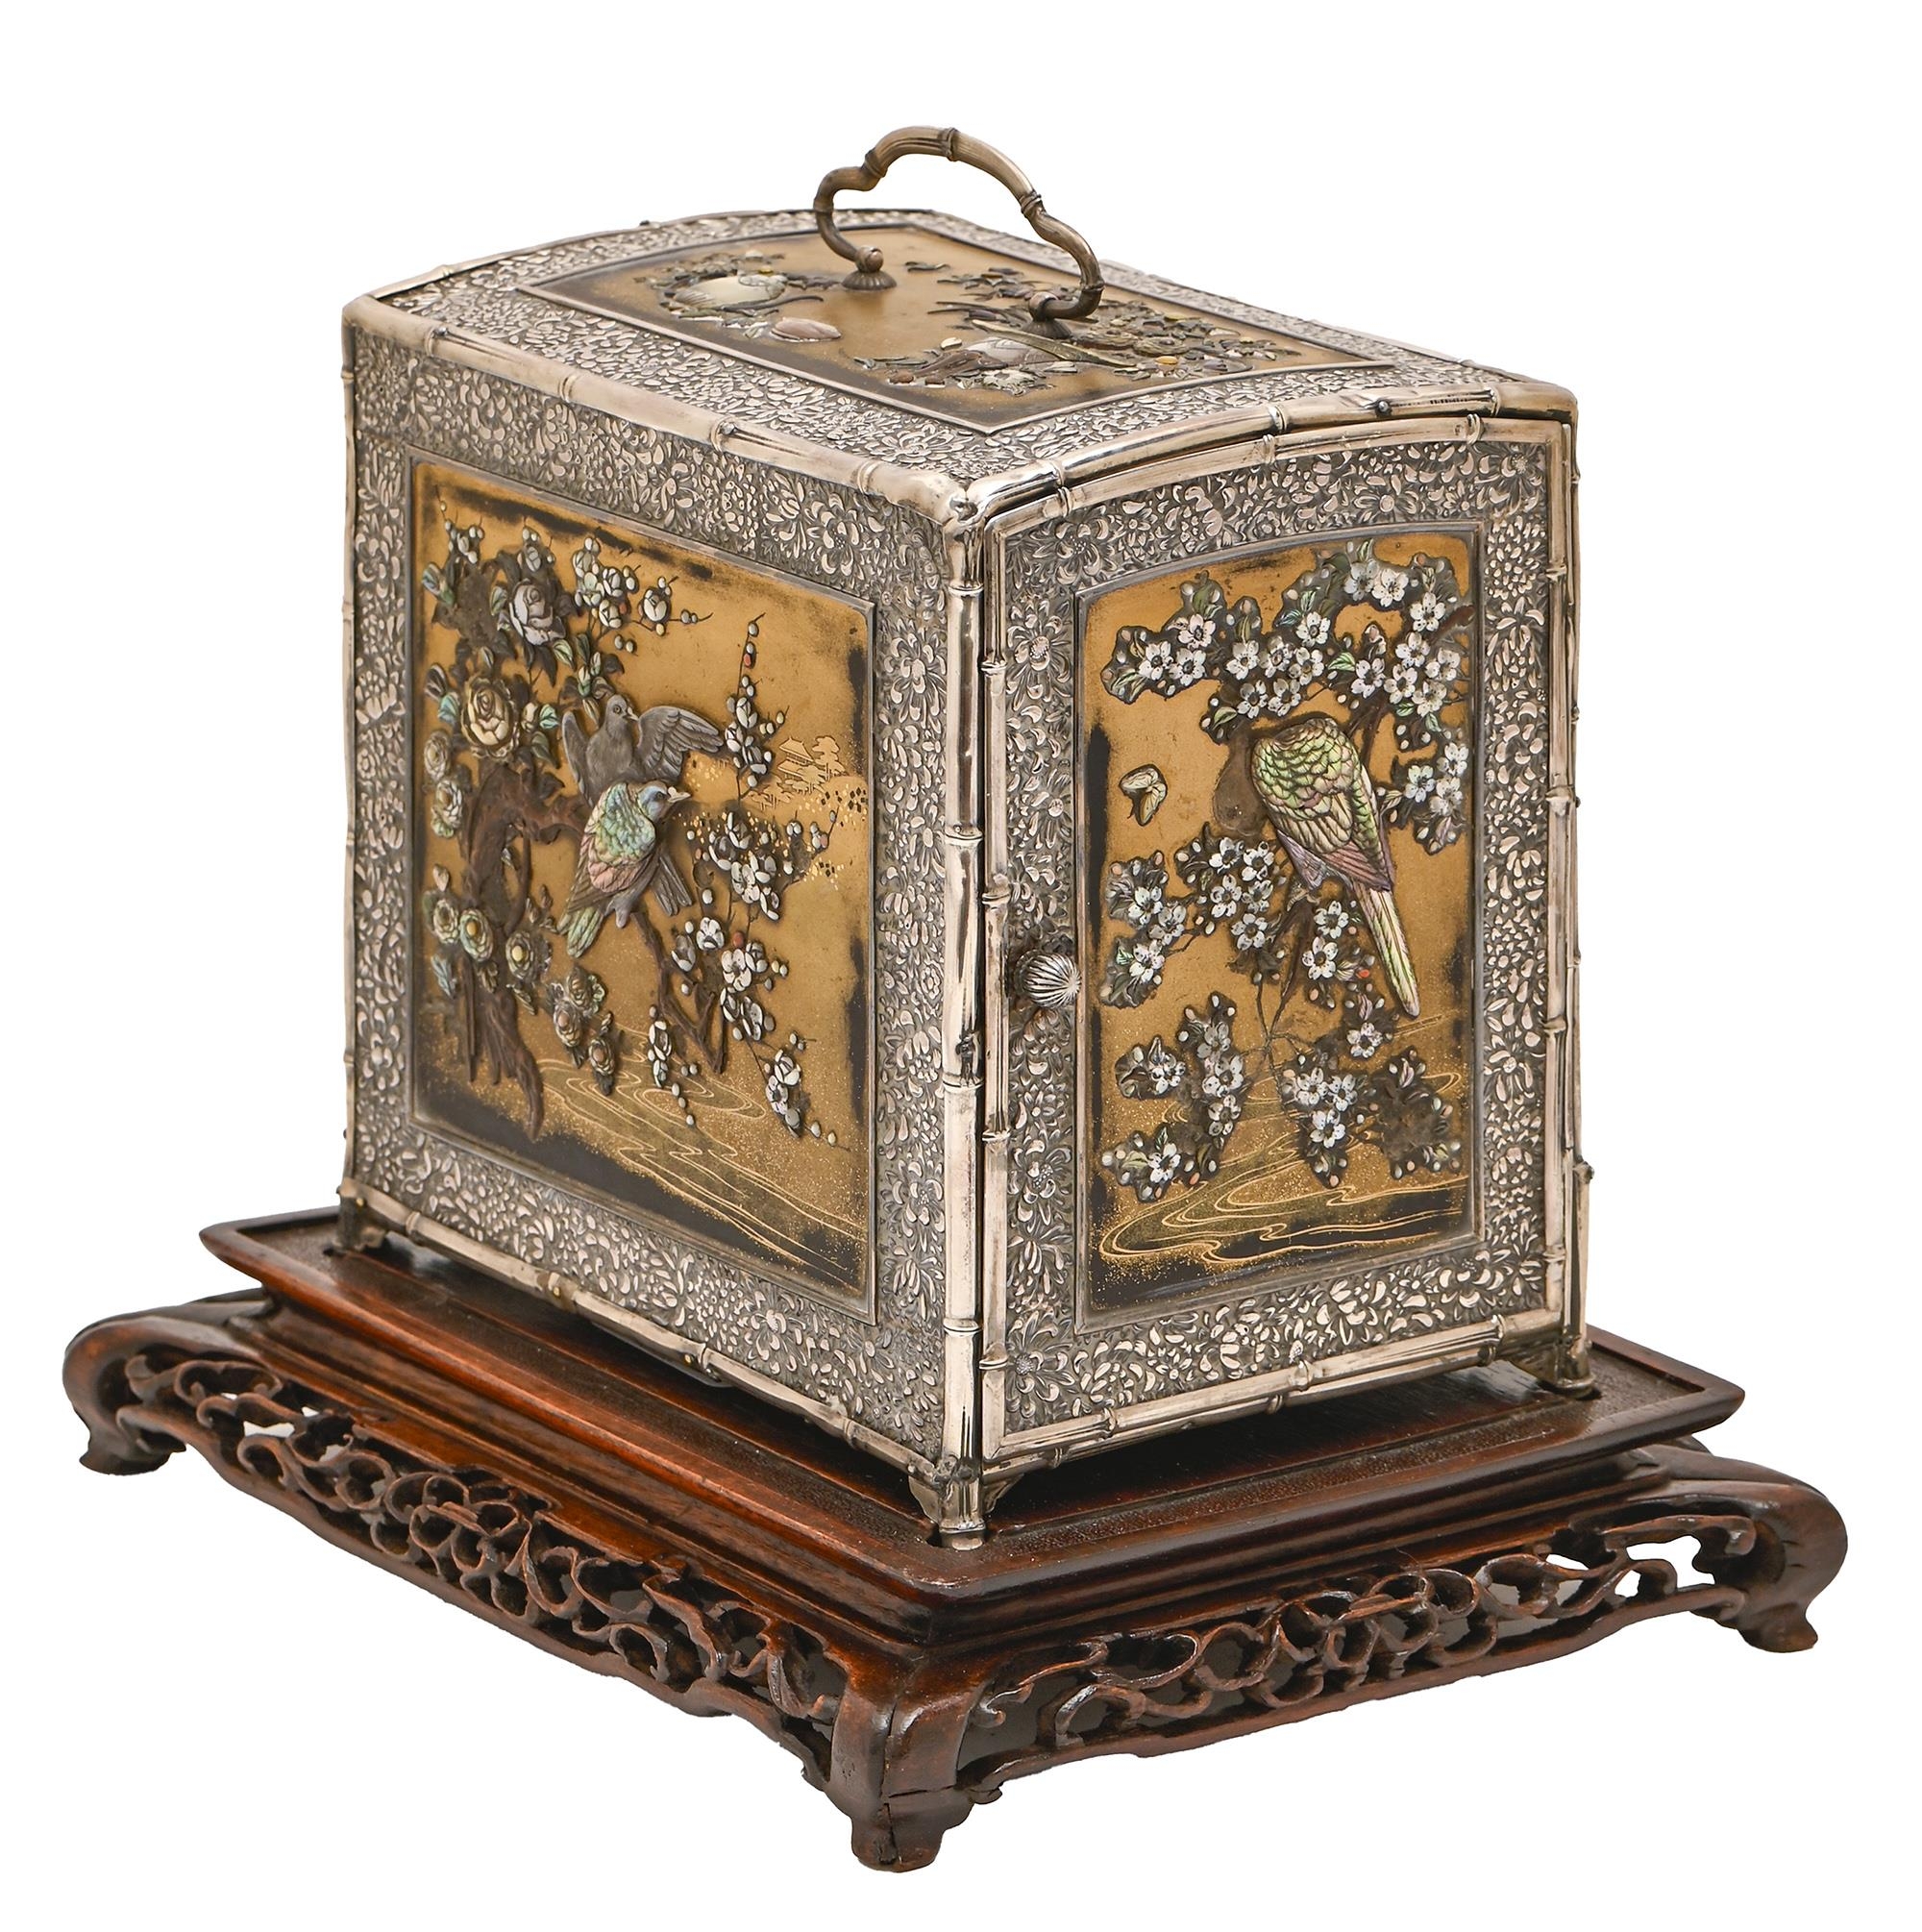 A Japanese silver mounted dhibayama cabinet, kodansu, Meiji period, slightly domed top decorated